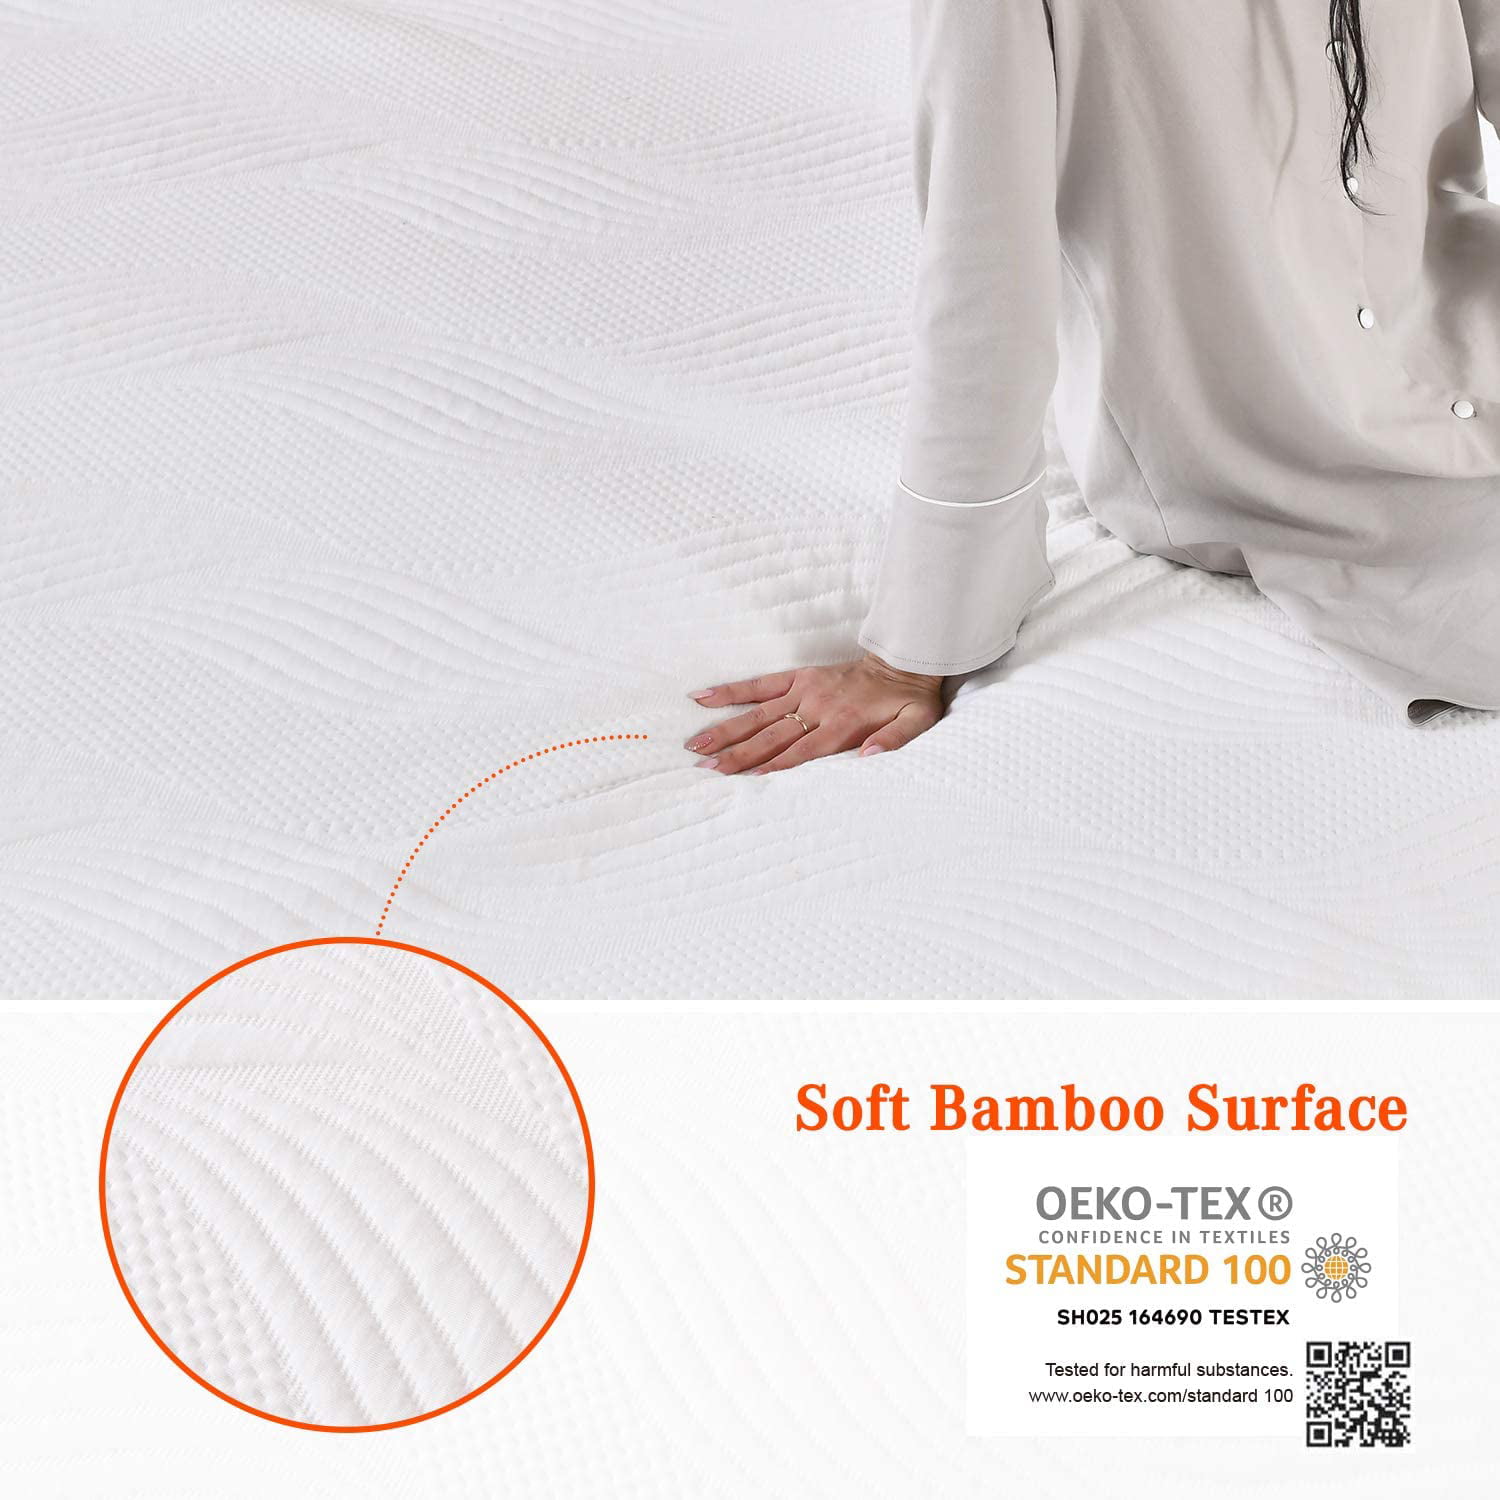 Silentnight Mattress Protector King Size Bed Silent Night Waterproof Protector 